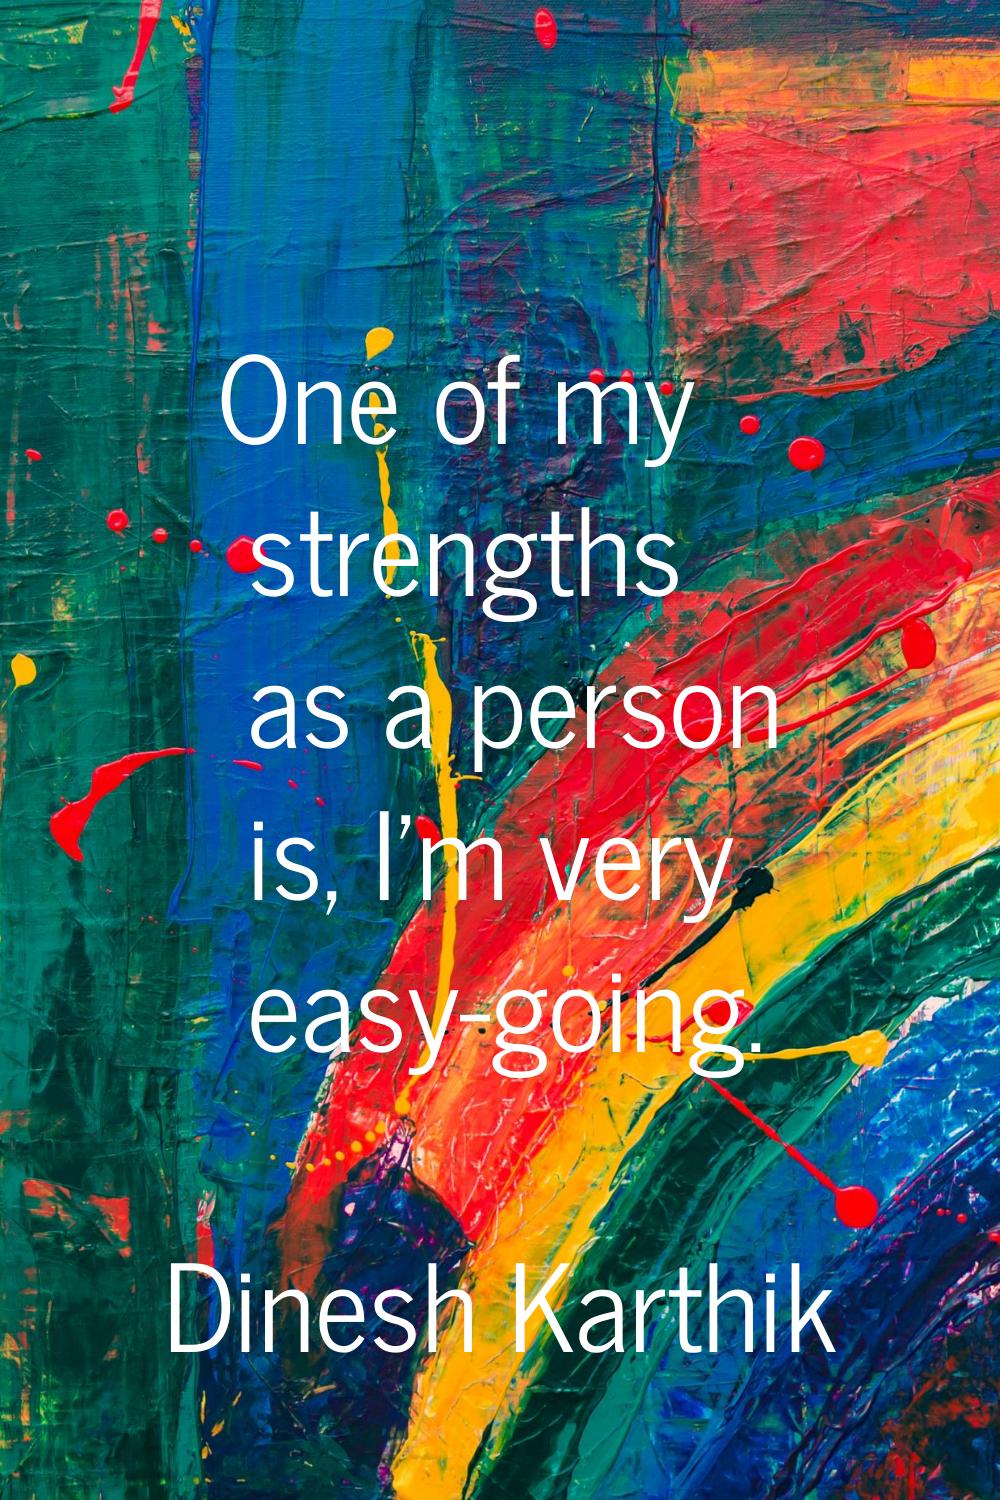 One of my strengths as a person is, I'm very easy-going.